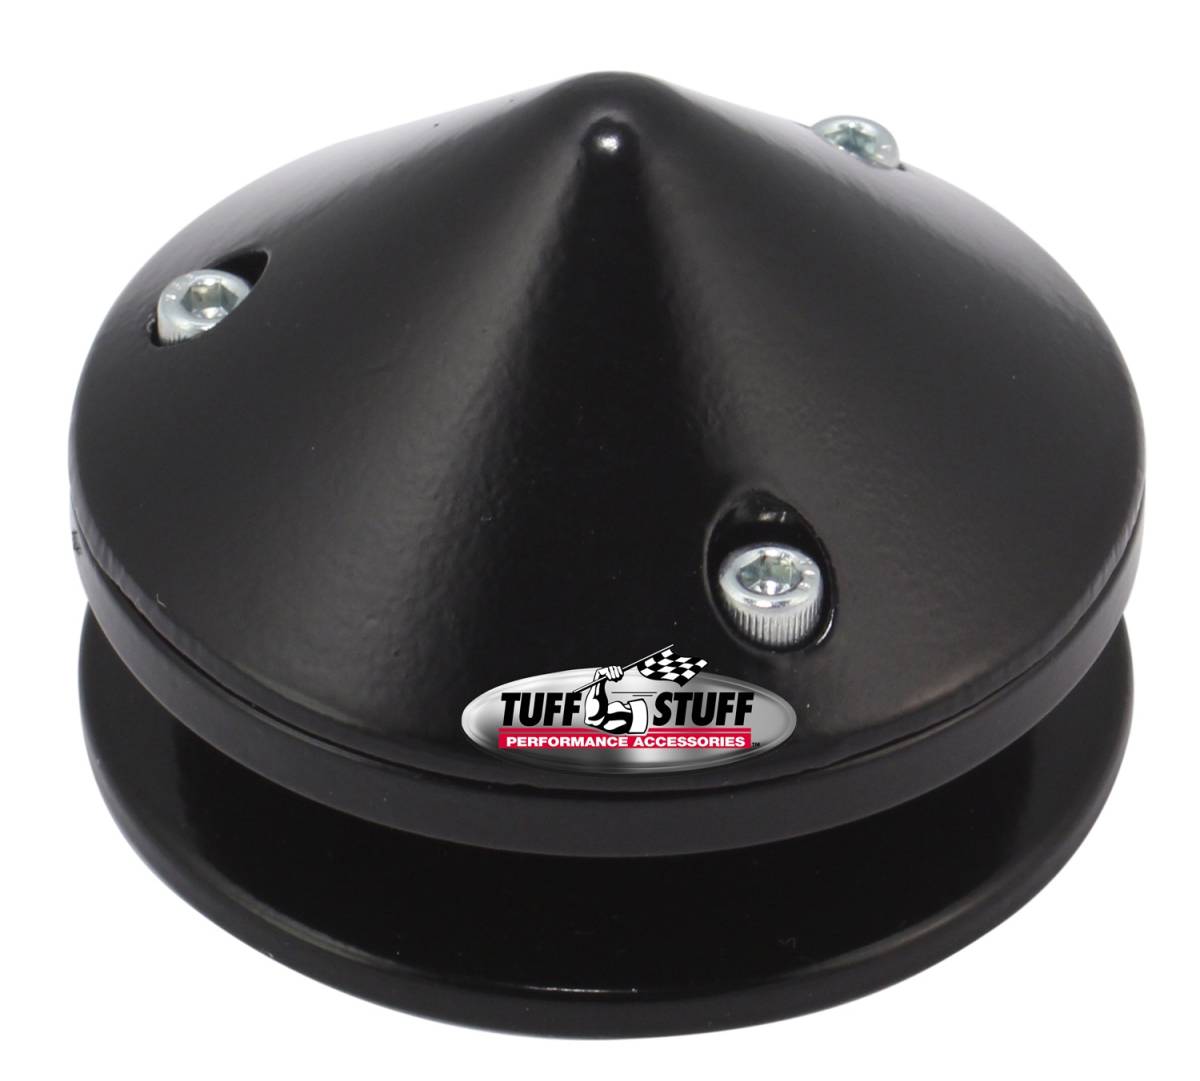 Tuff Stuff Performance - Alternator Pulley And Bullet Cover 2.25 in. Pulley Single V Groove Incl. Lock Washer/Nut Stealth Black 7650C